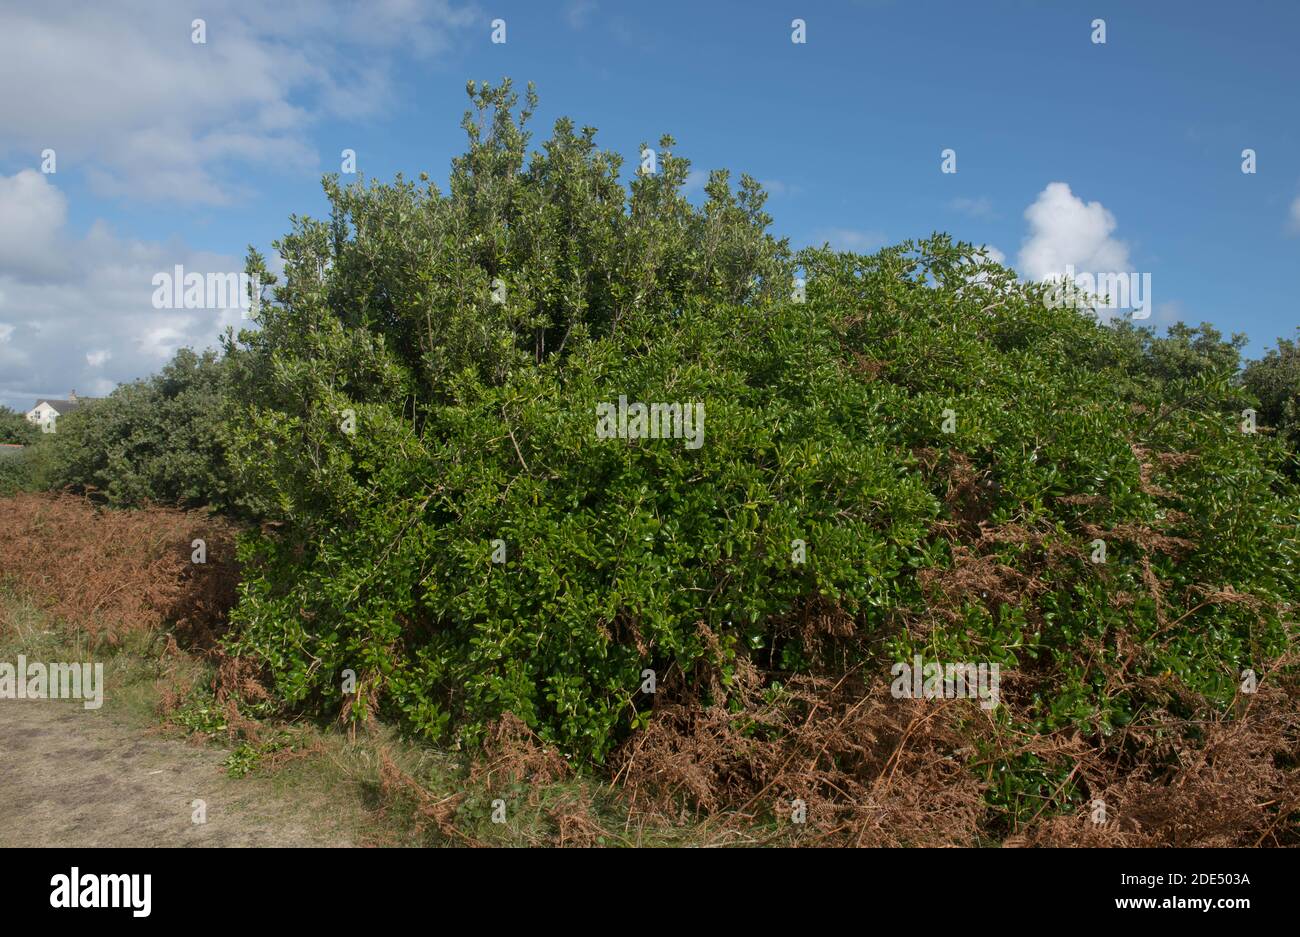 Green Foliage of the Evergreen Karo Shrub (Pittosporum crassifolium) Growing by the Coast on the Island of Bryher in the Isles of Scilly, England, UK Stock Photo